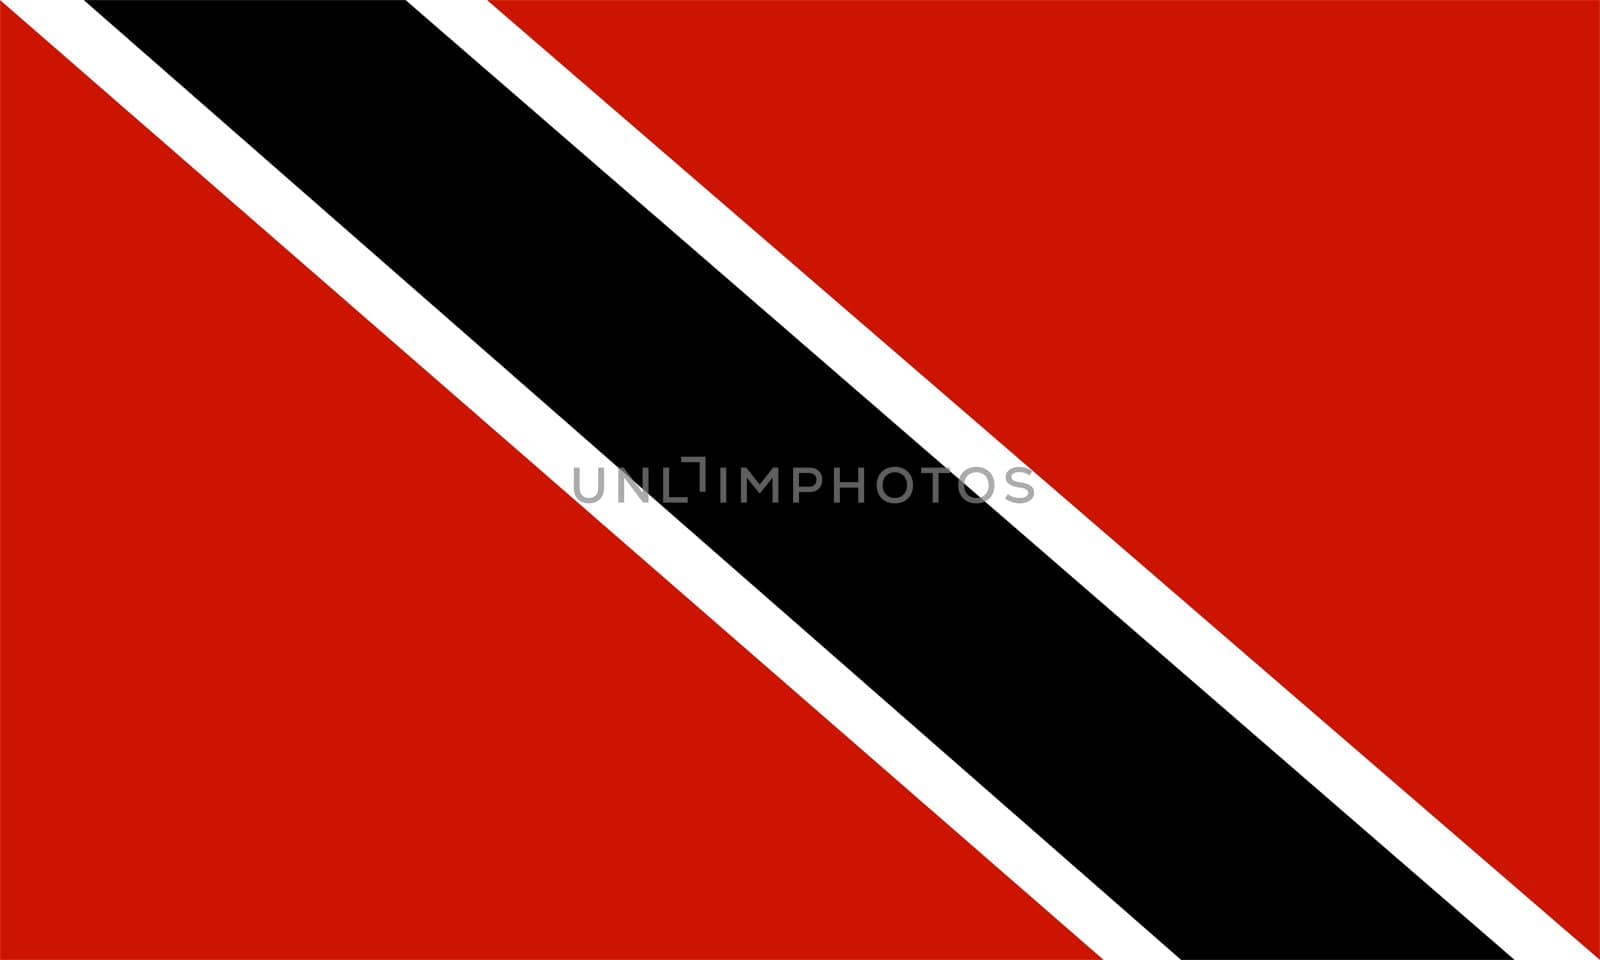 2D illustration of the flag of Trinidad and Tobago